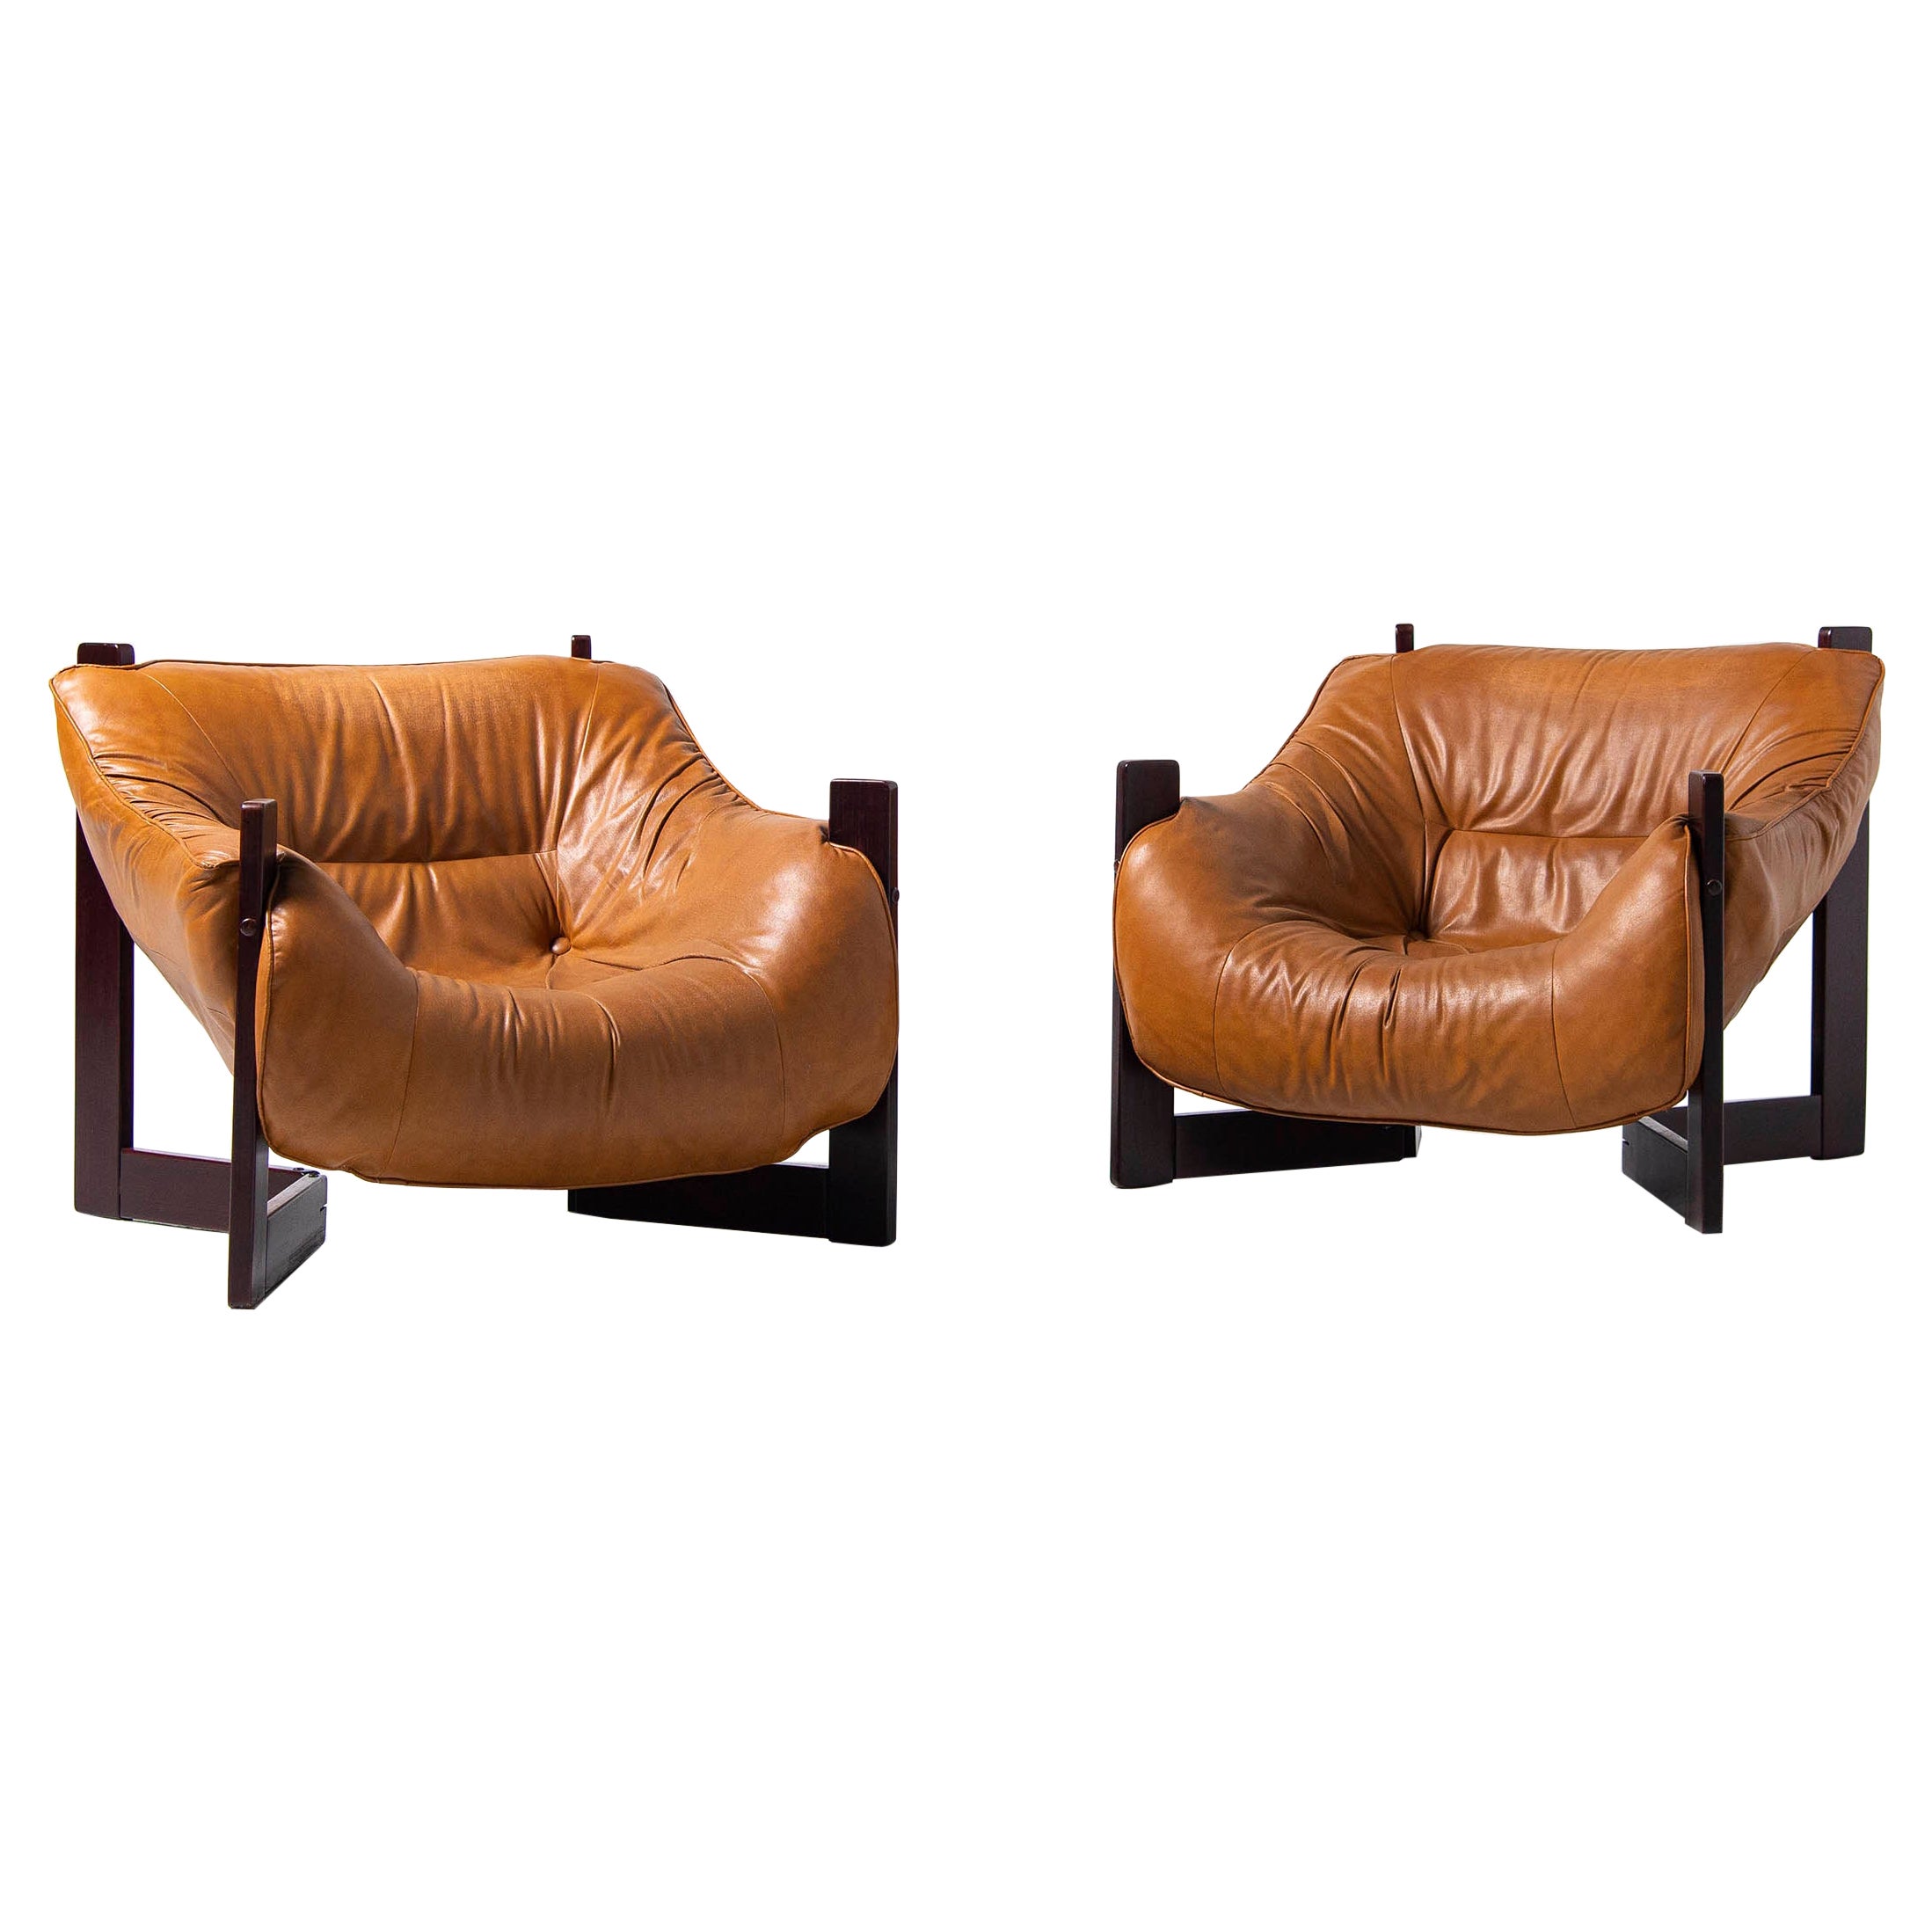 Percival Lafer Lounge Chairs in Mahogany & Leather Brazil, 1970